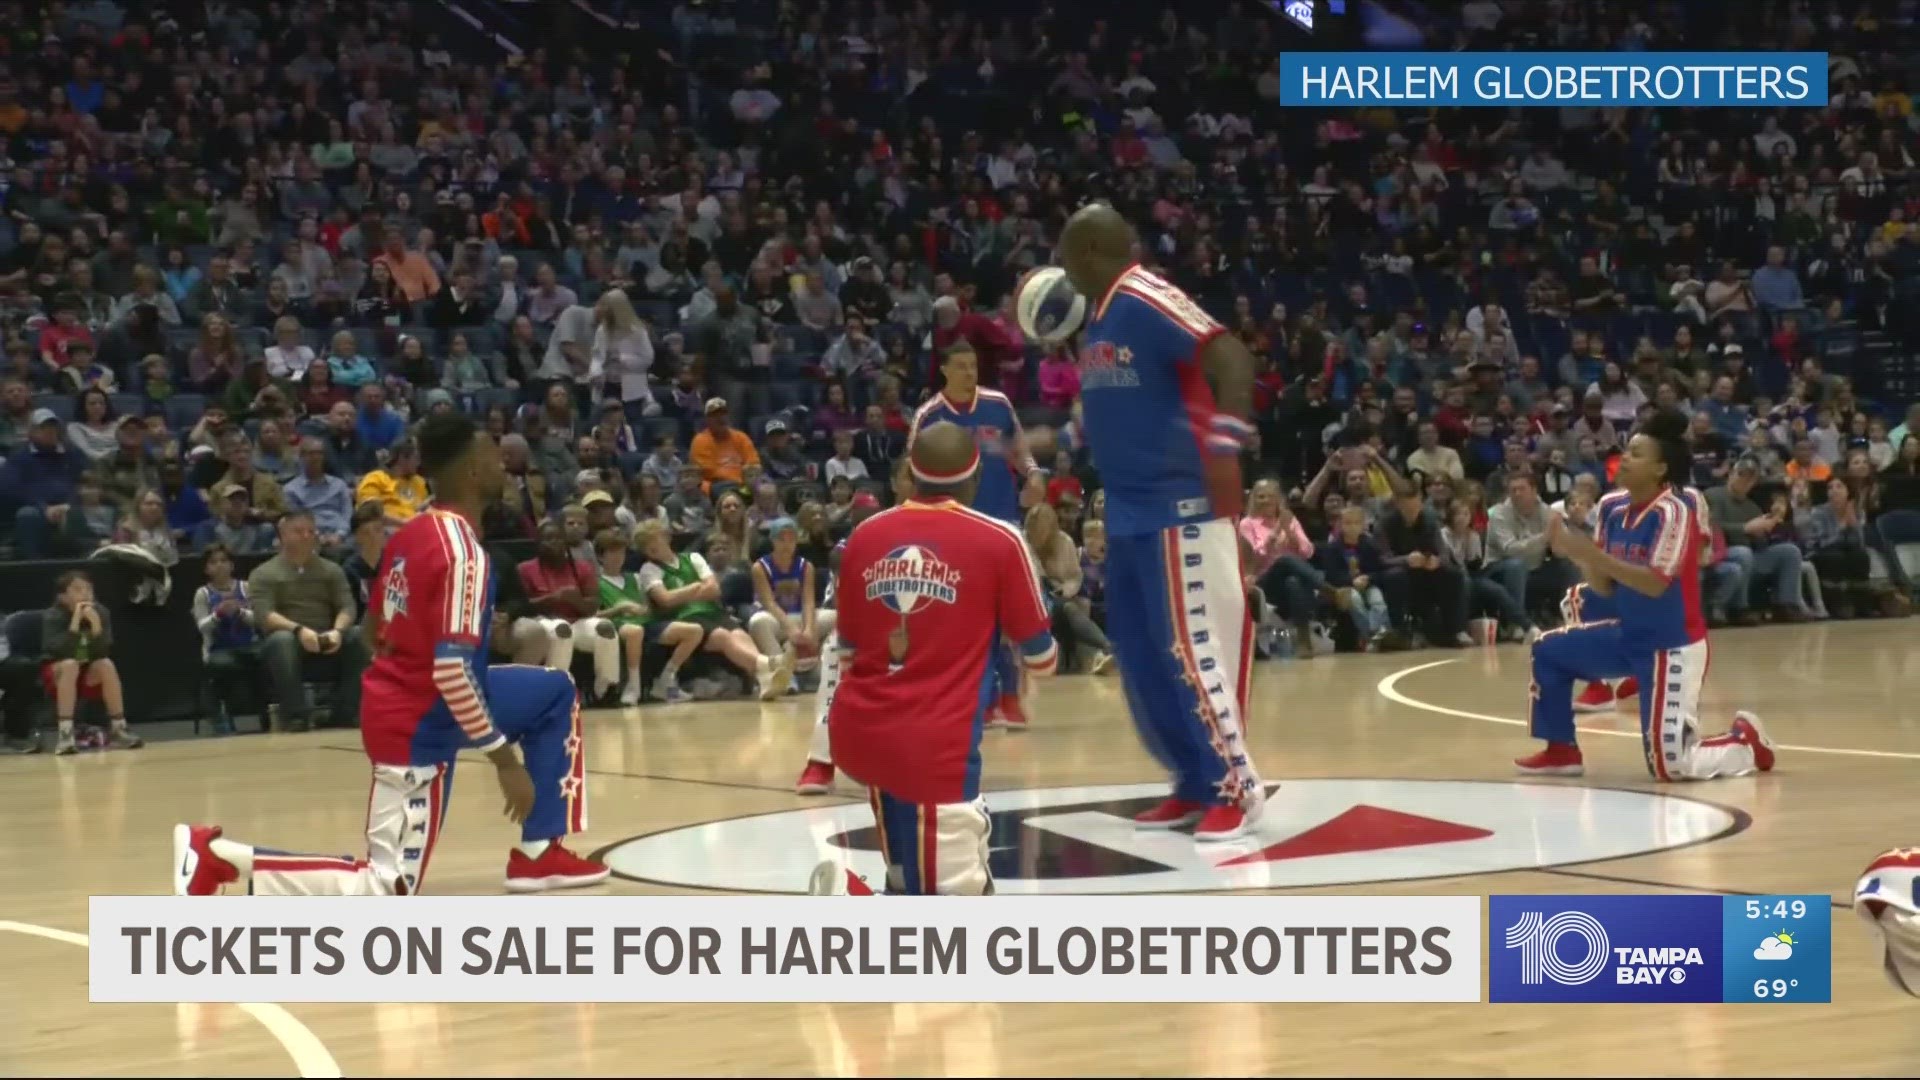 The Globetrotters will take on their rivals the Washington Generals in the big game.